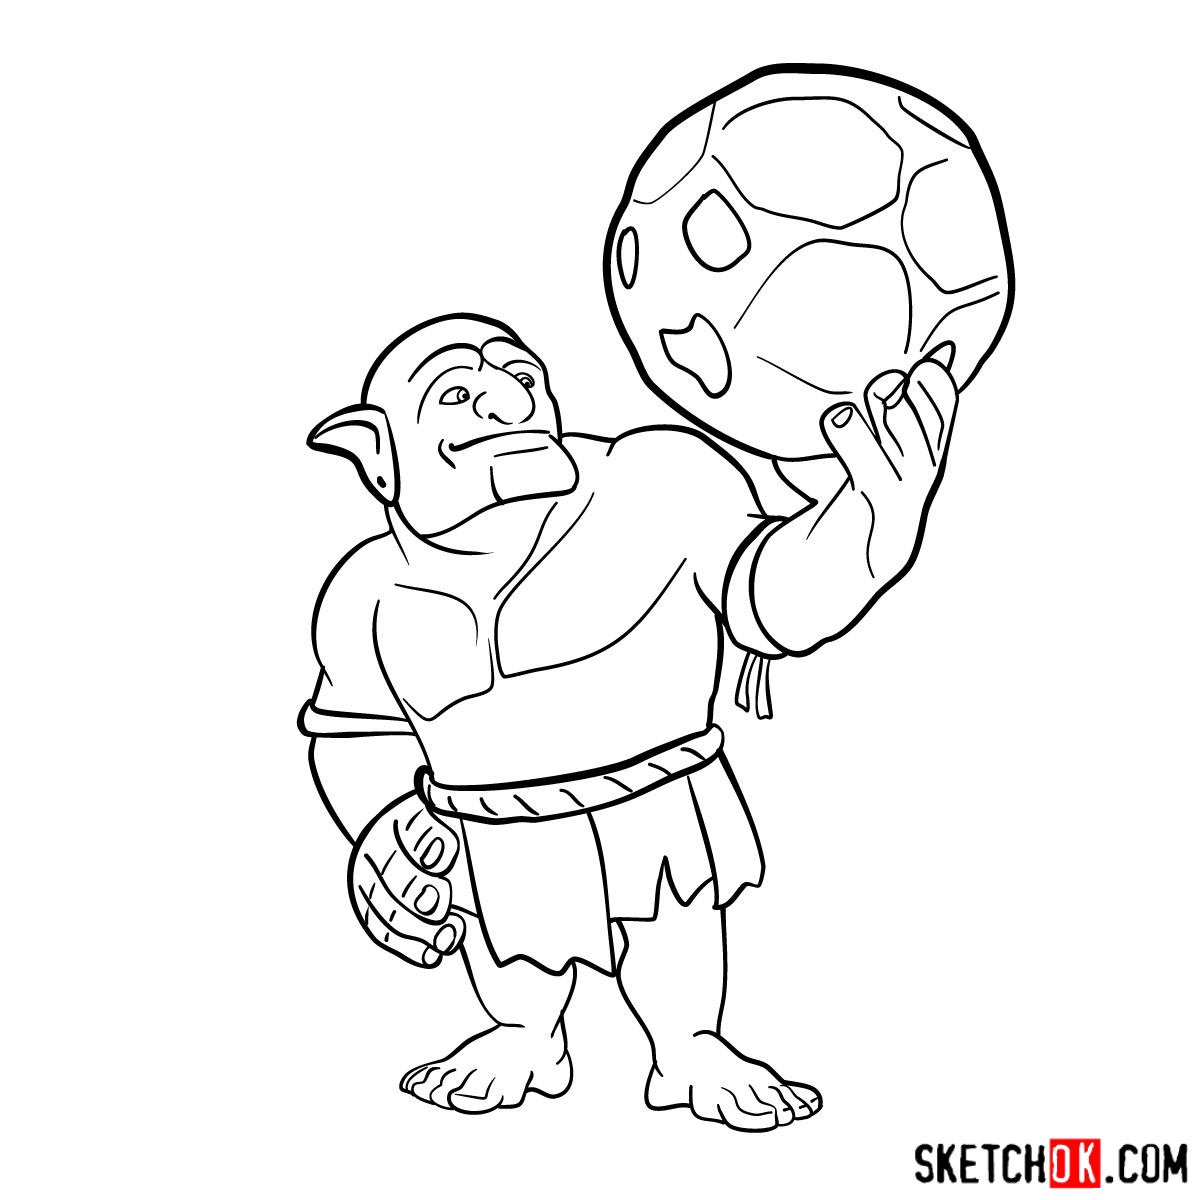 How to draw Bowler from Clash of Clans - step 10.